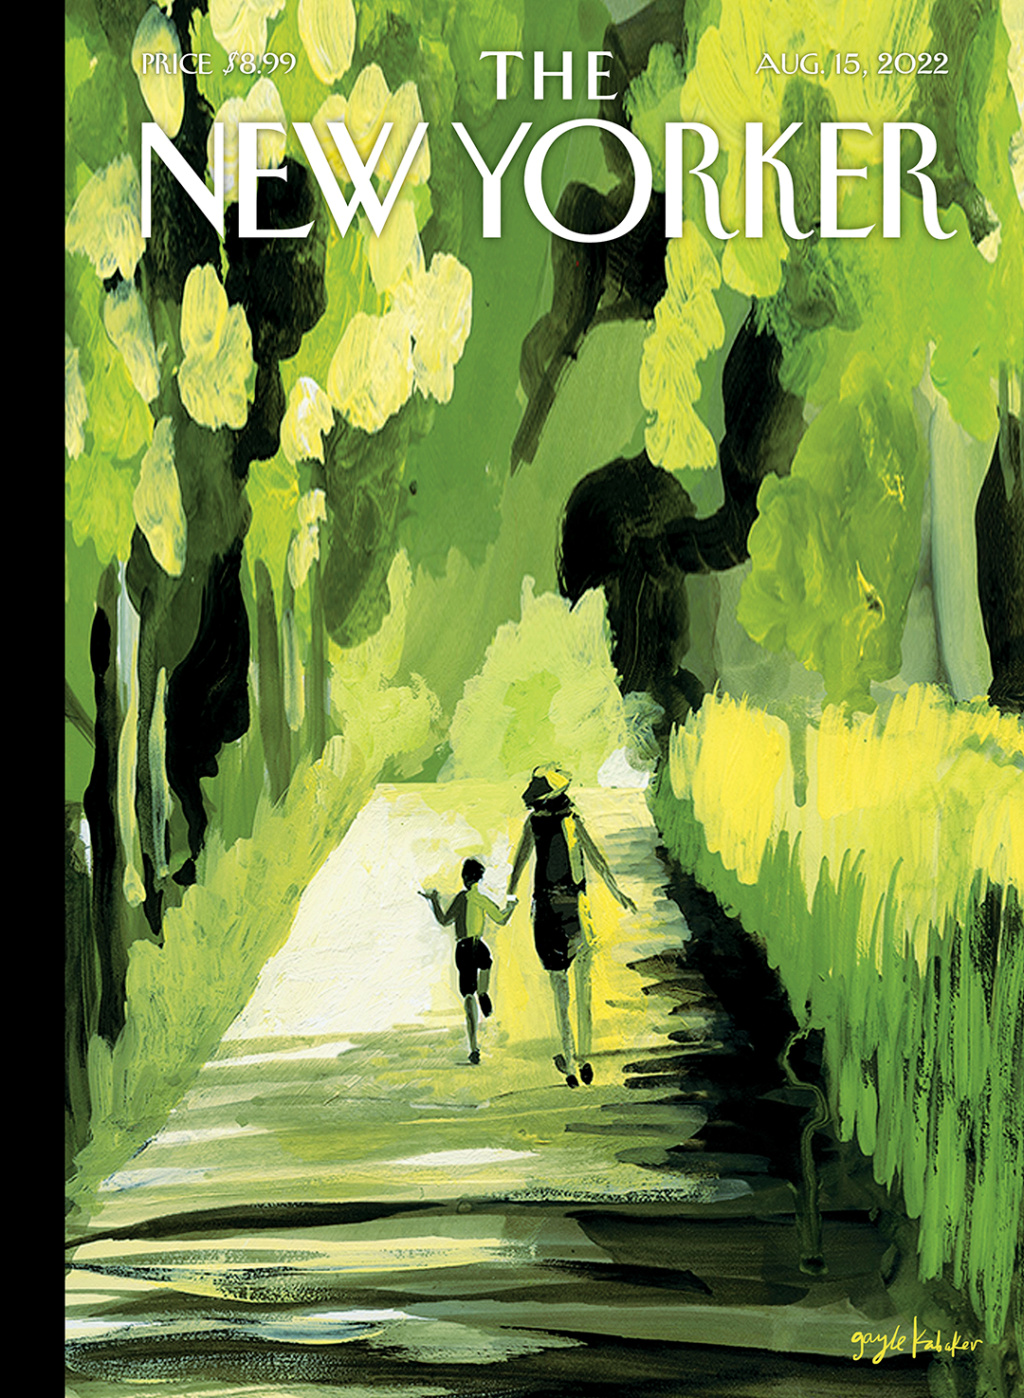 The New Yorker : Les couvertures - Page 3 Summer14